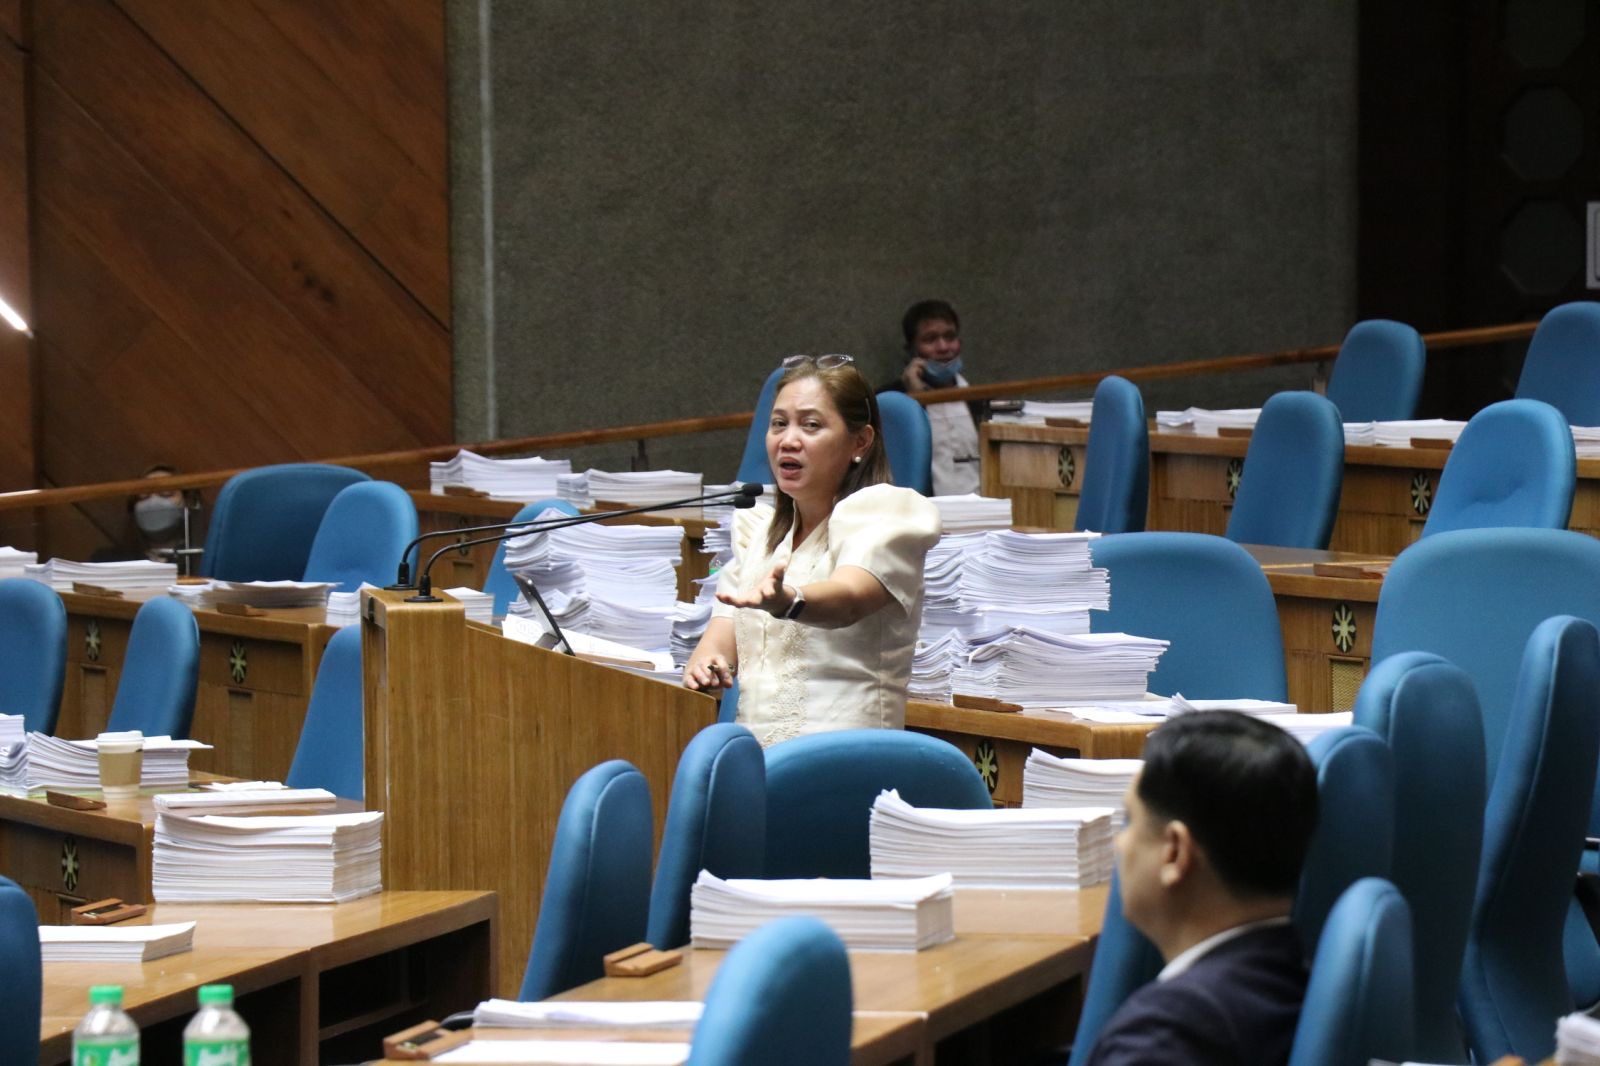 Empty chairs at empty tables: Lack of warm bodies in plenary upsets lawmaker